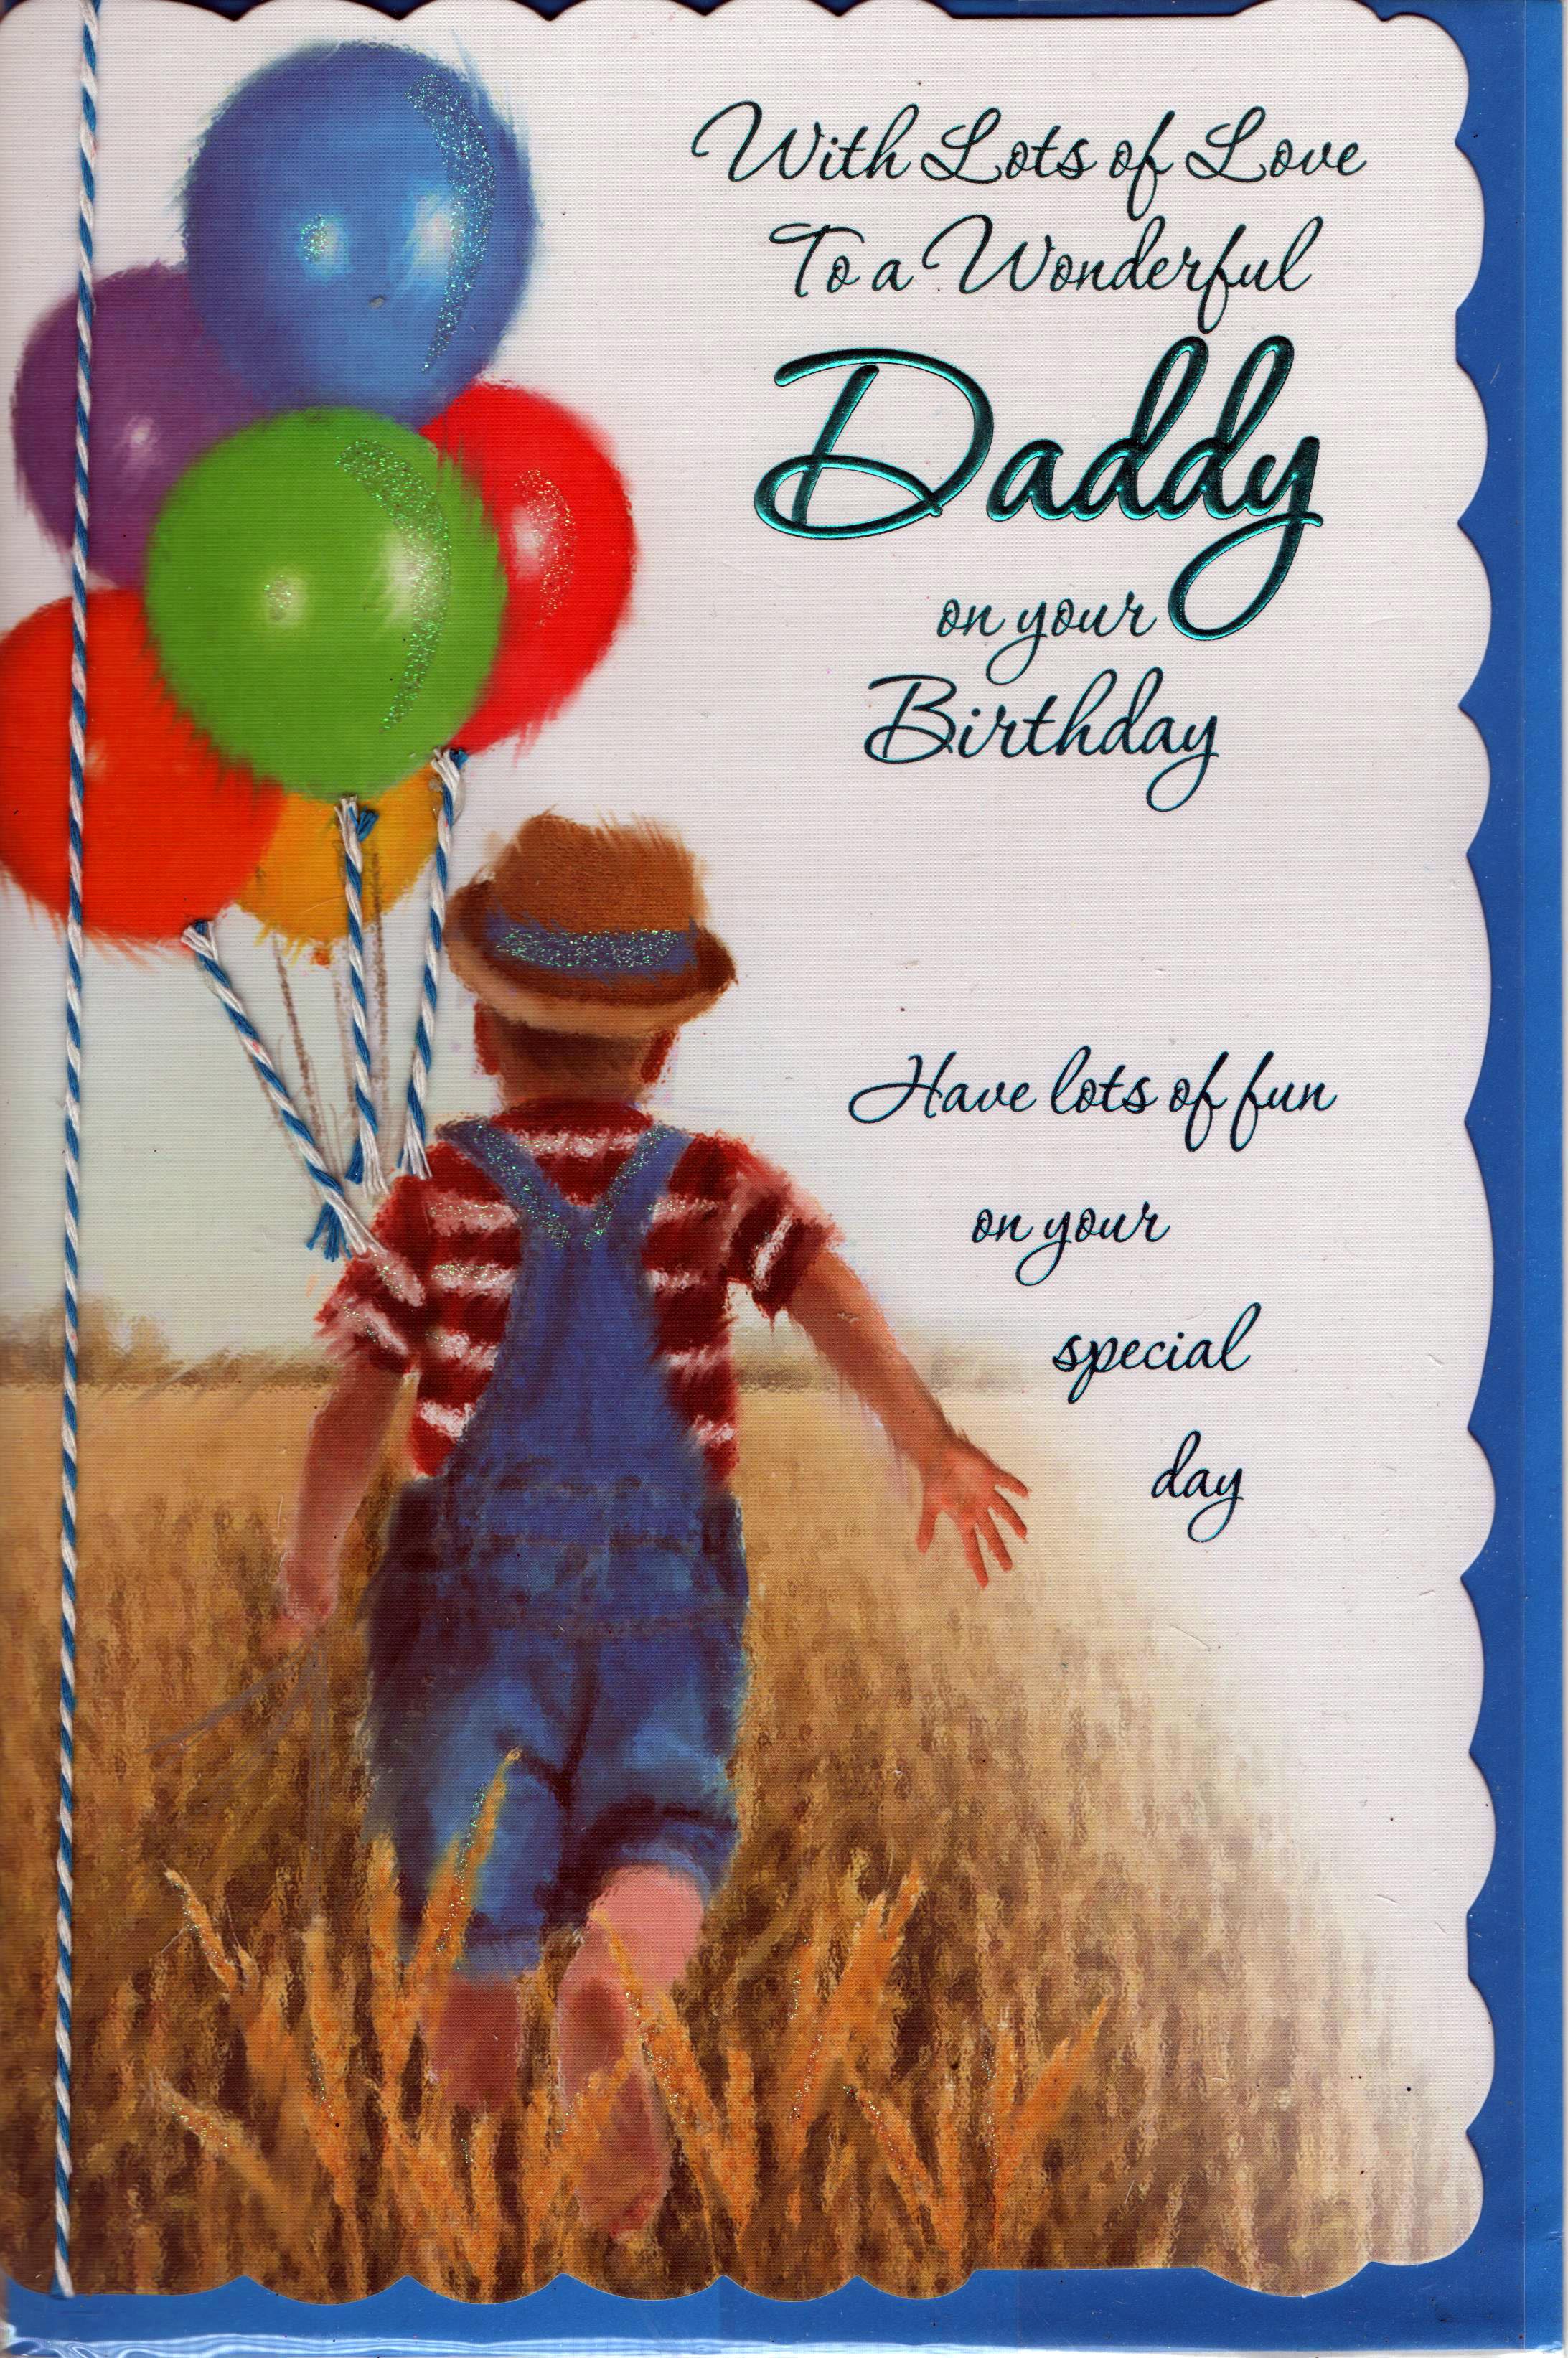 With Lots of Love to a Wanderful Daddy On Your Birthday